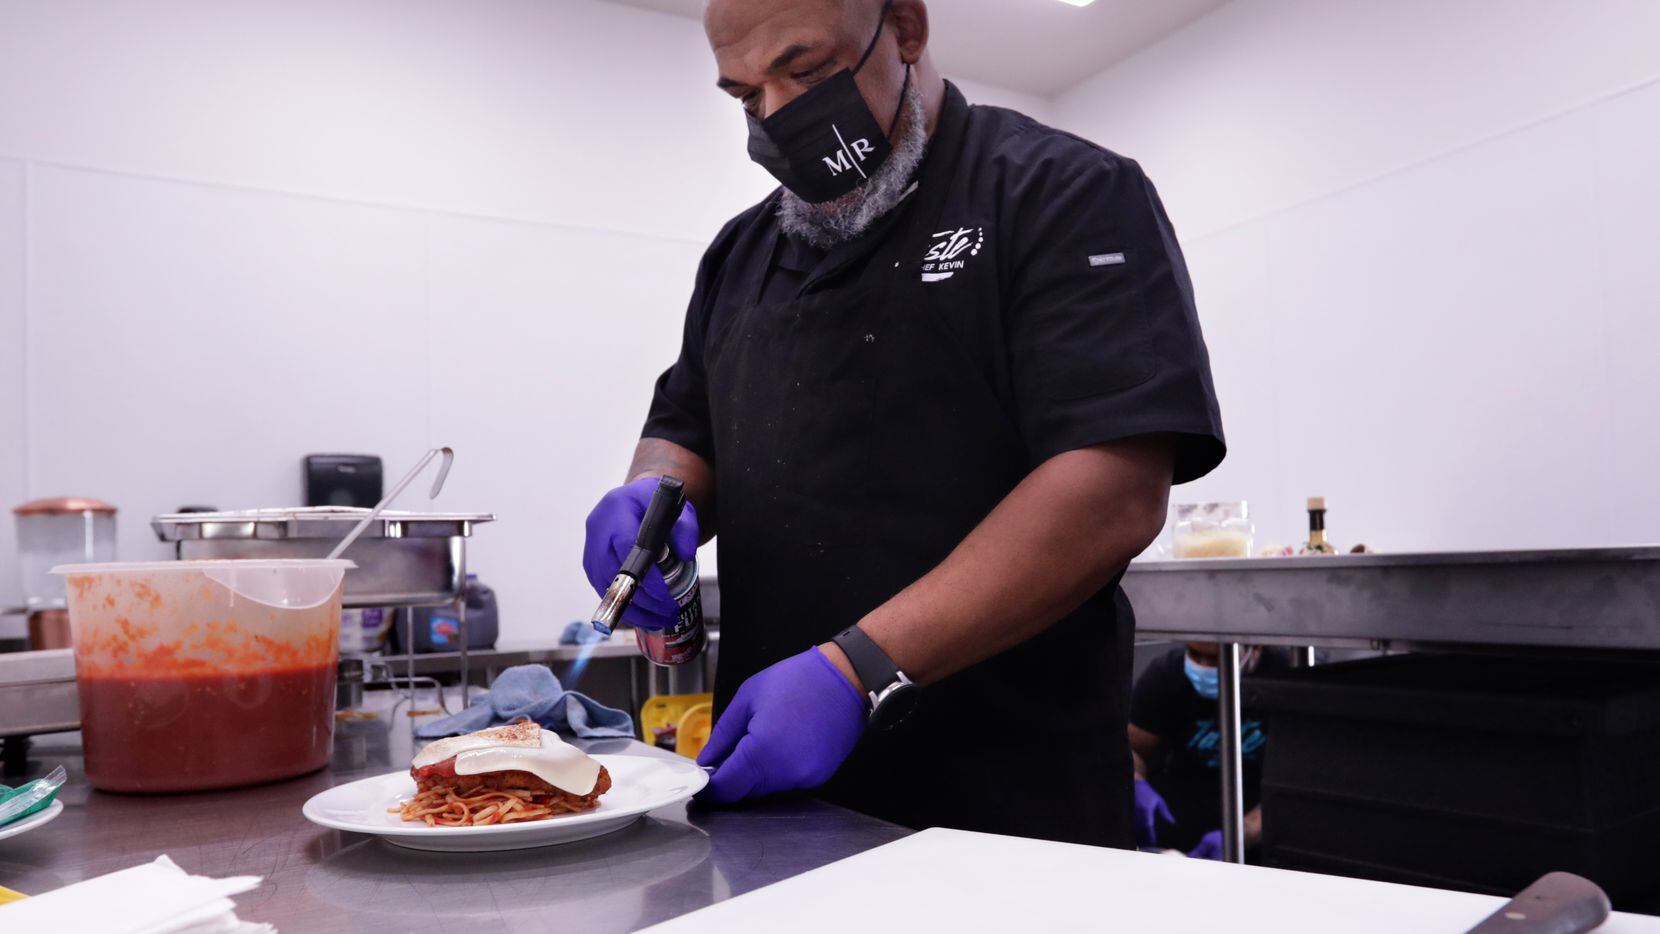 Kevin Johnson prepares food for a wedding reception at Knotting Hill Place in Little Elm.